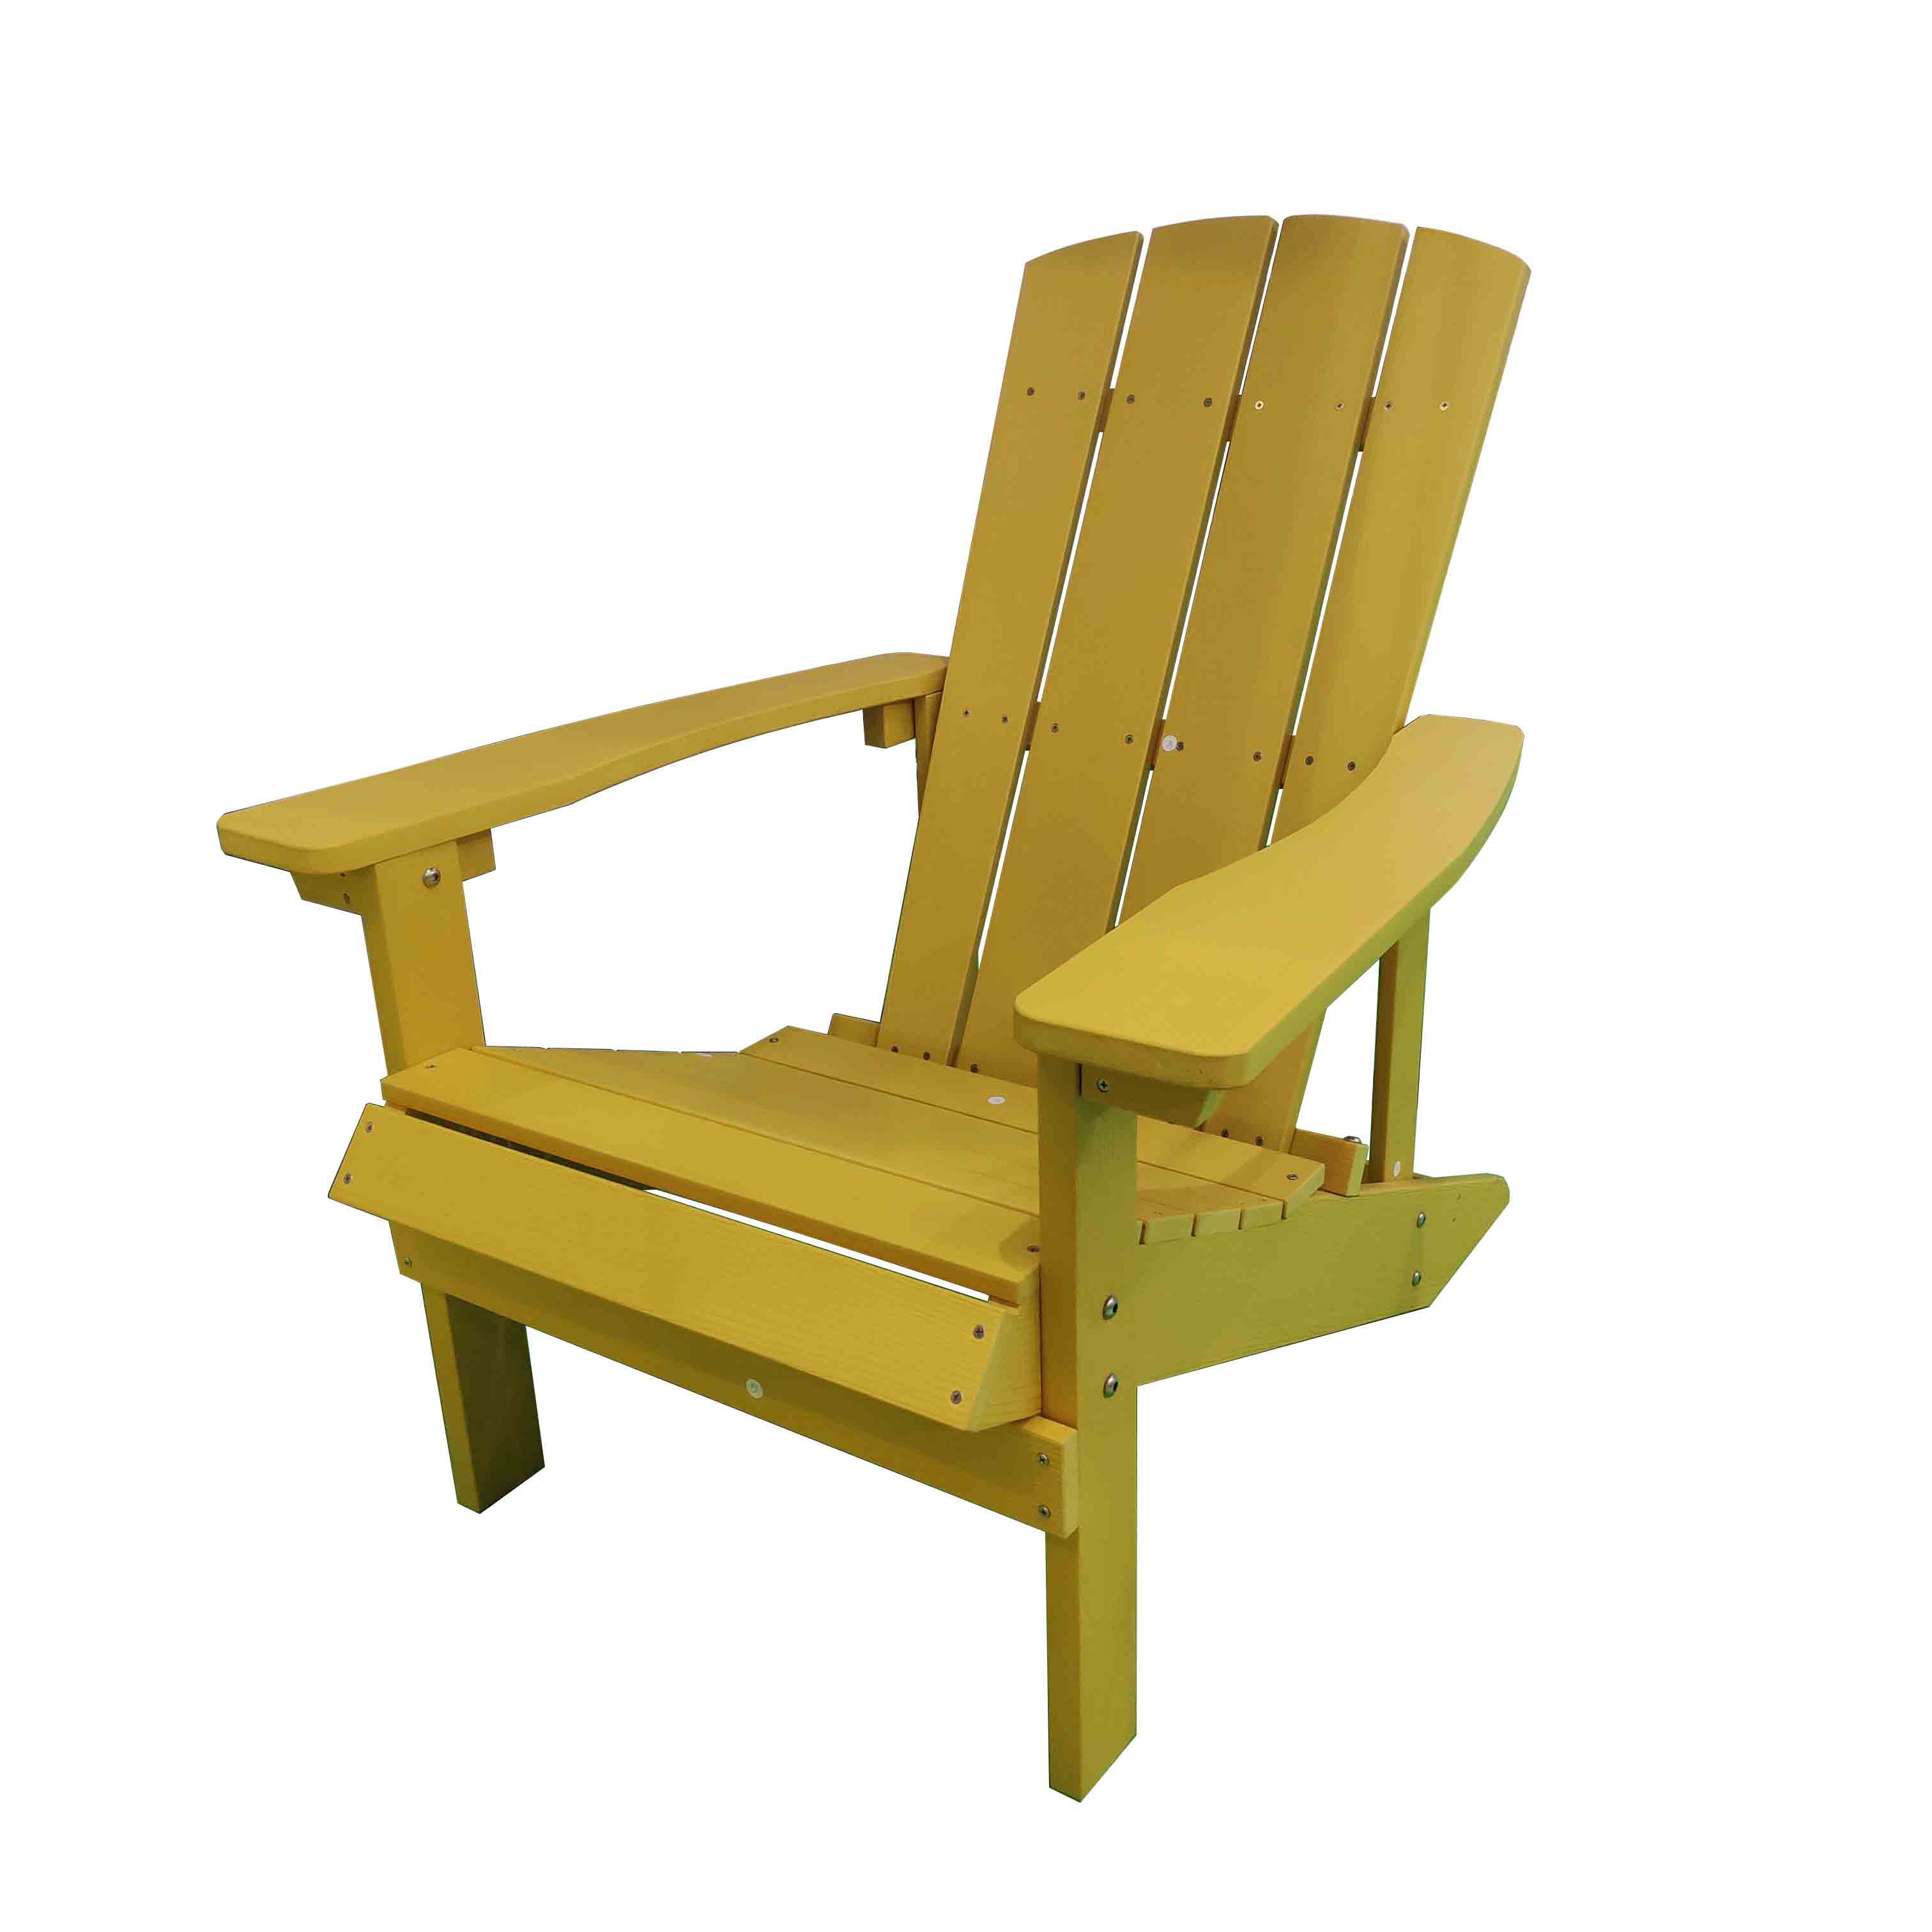 Ordinary Discount Woven Bistro Chairs - JJ-C14501-YLW-GG PS wood Adirondack chair – Jin-jiang Industry